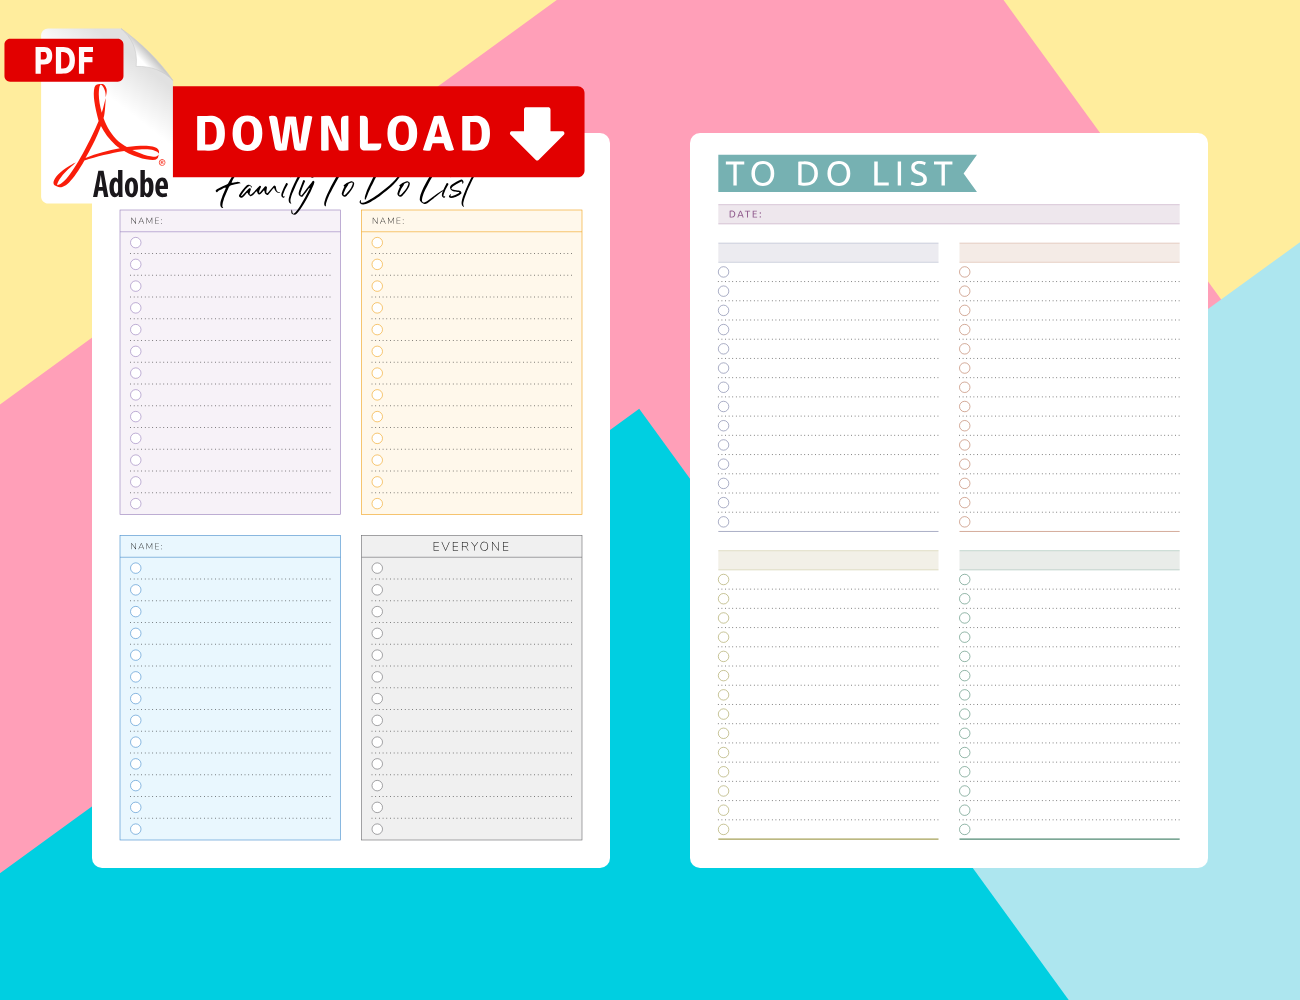 To Do List Templates - Download Task List PDF Pertaining To Daily Task List Template Word